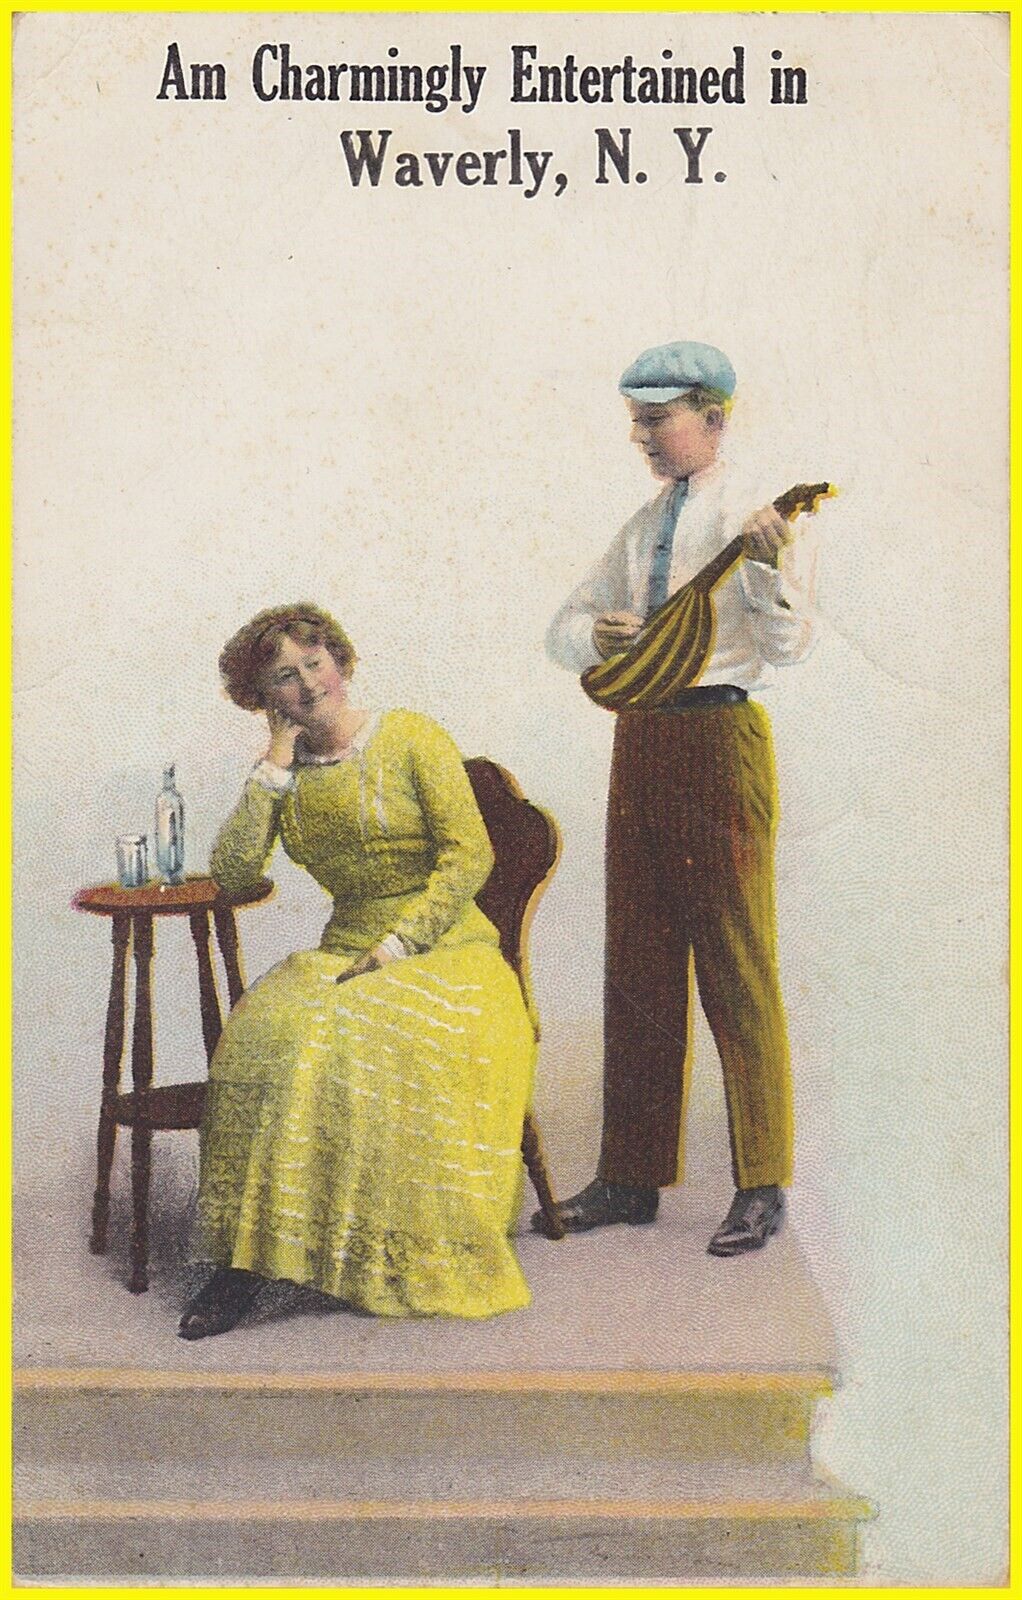 Am Charmingly Entertained in Waverly, New York - 1912